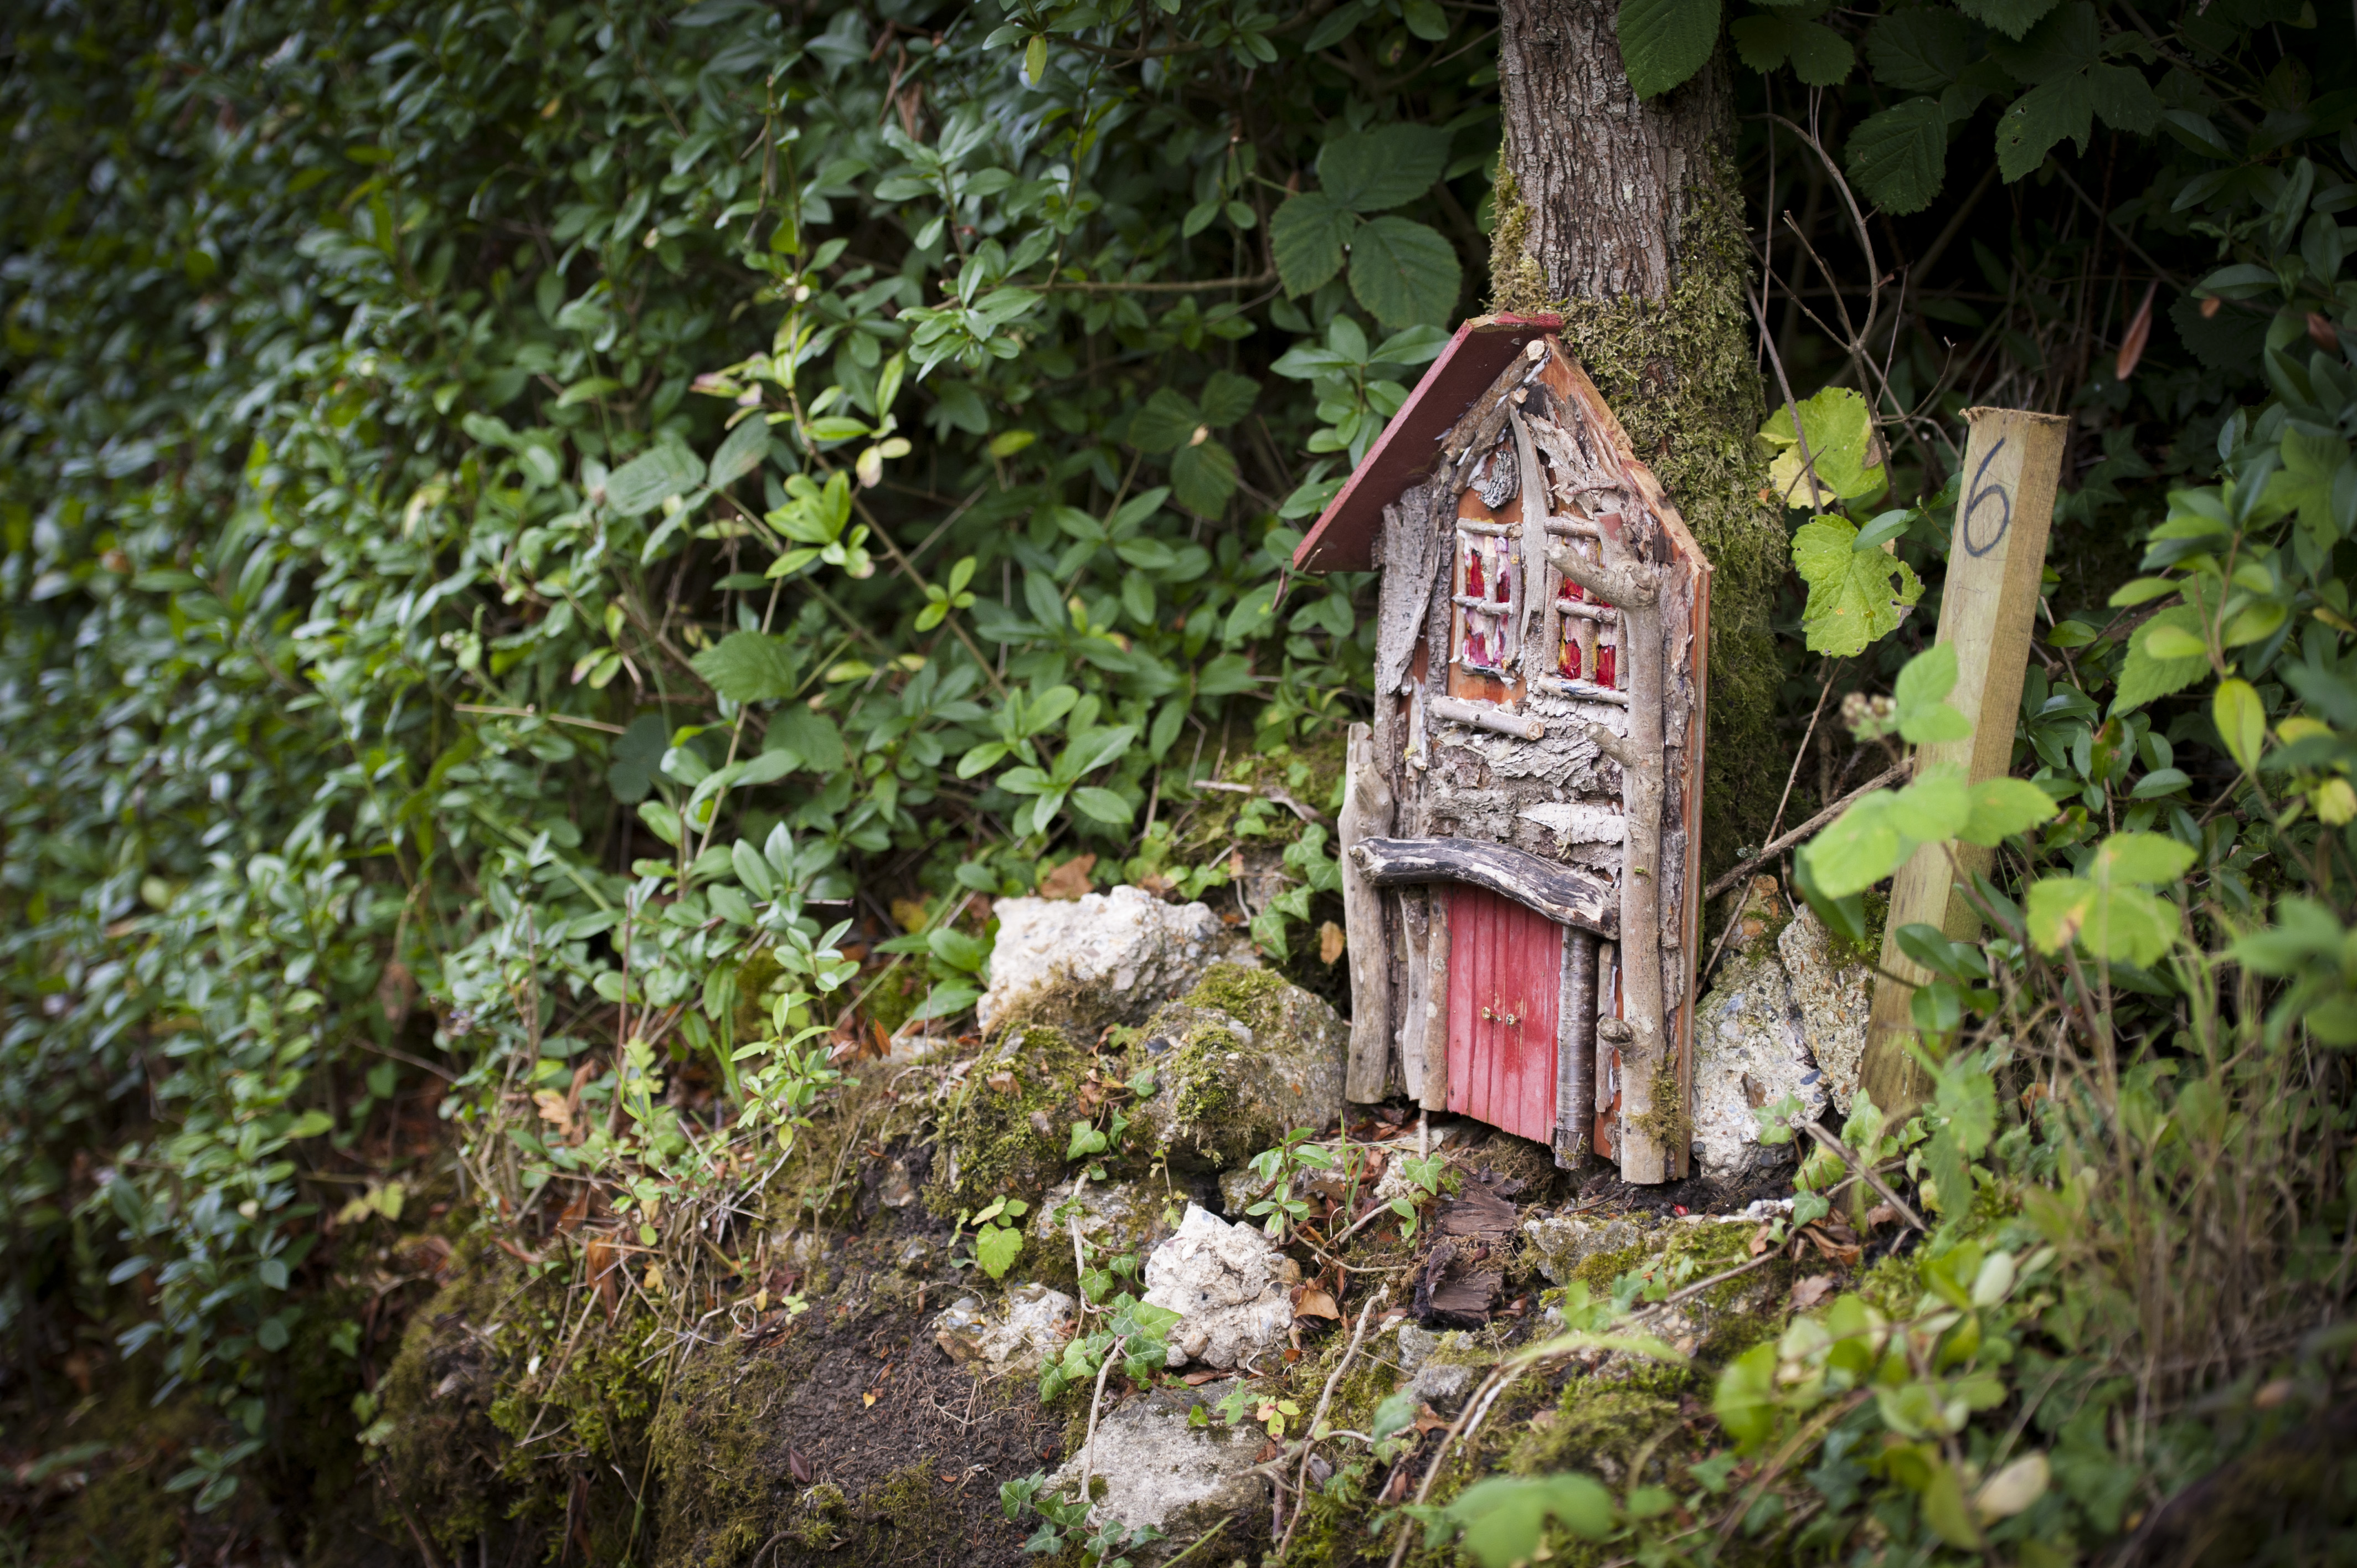 Part of the Fairy Trail at Monkton Nature Reserve. Image by Chris Constantine.